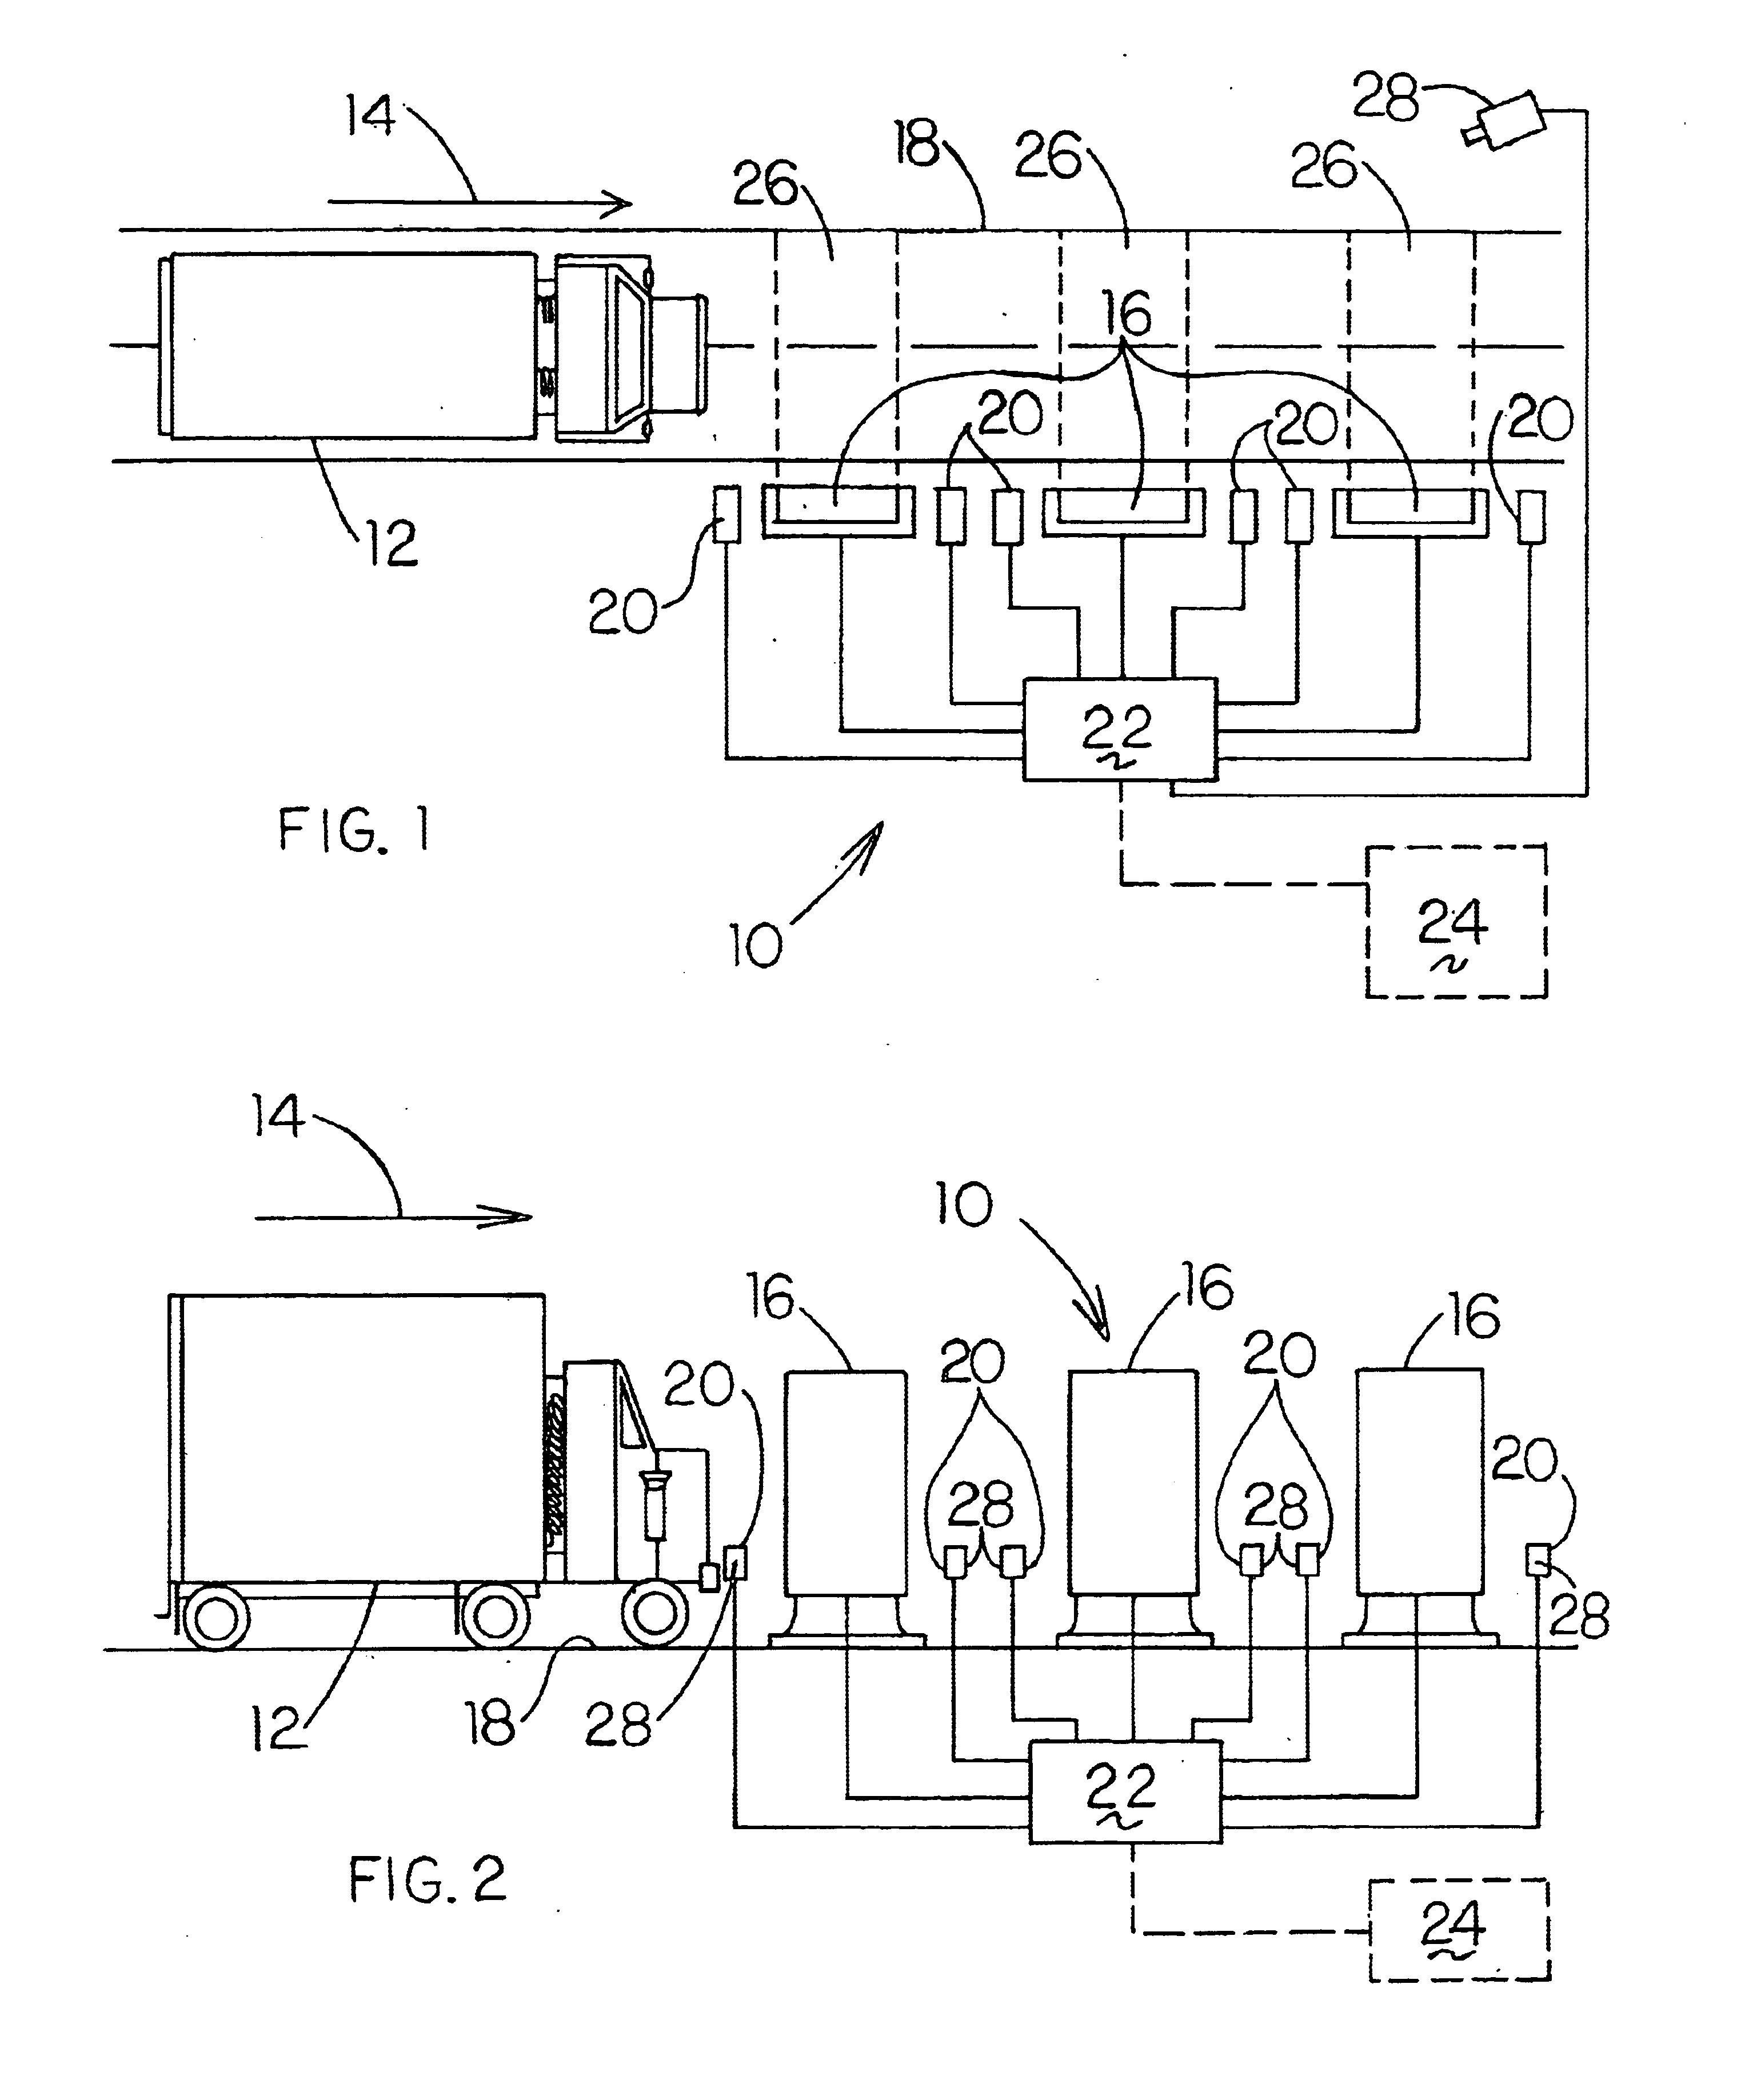 Method and apparatus for a radiation monitoring system